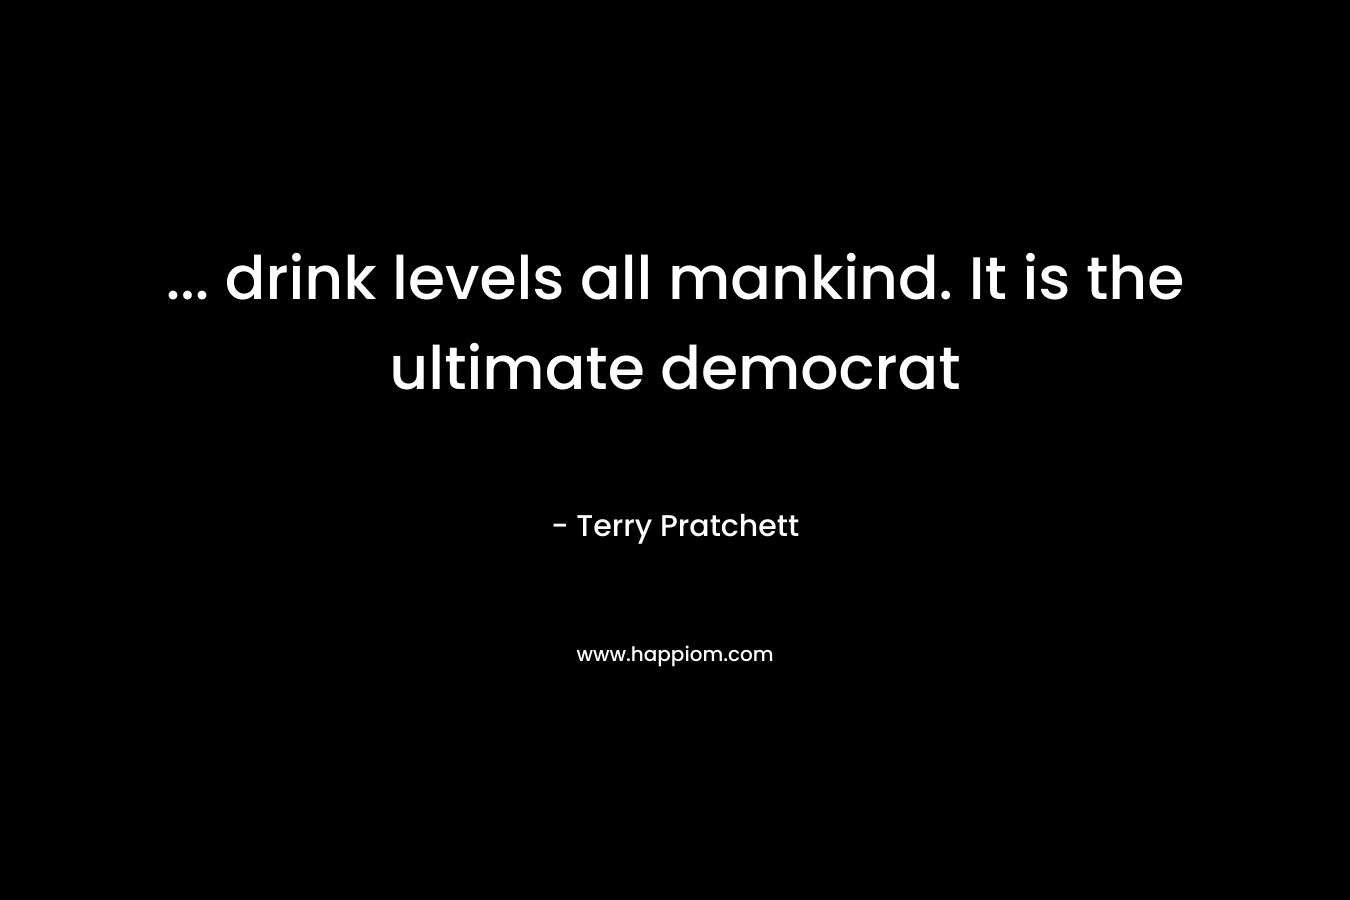 ... drink levels all mankind. It is the ultimate democrat